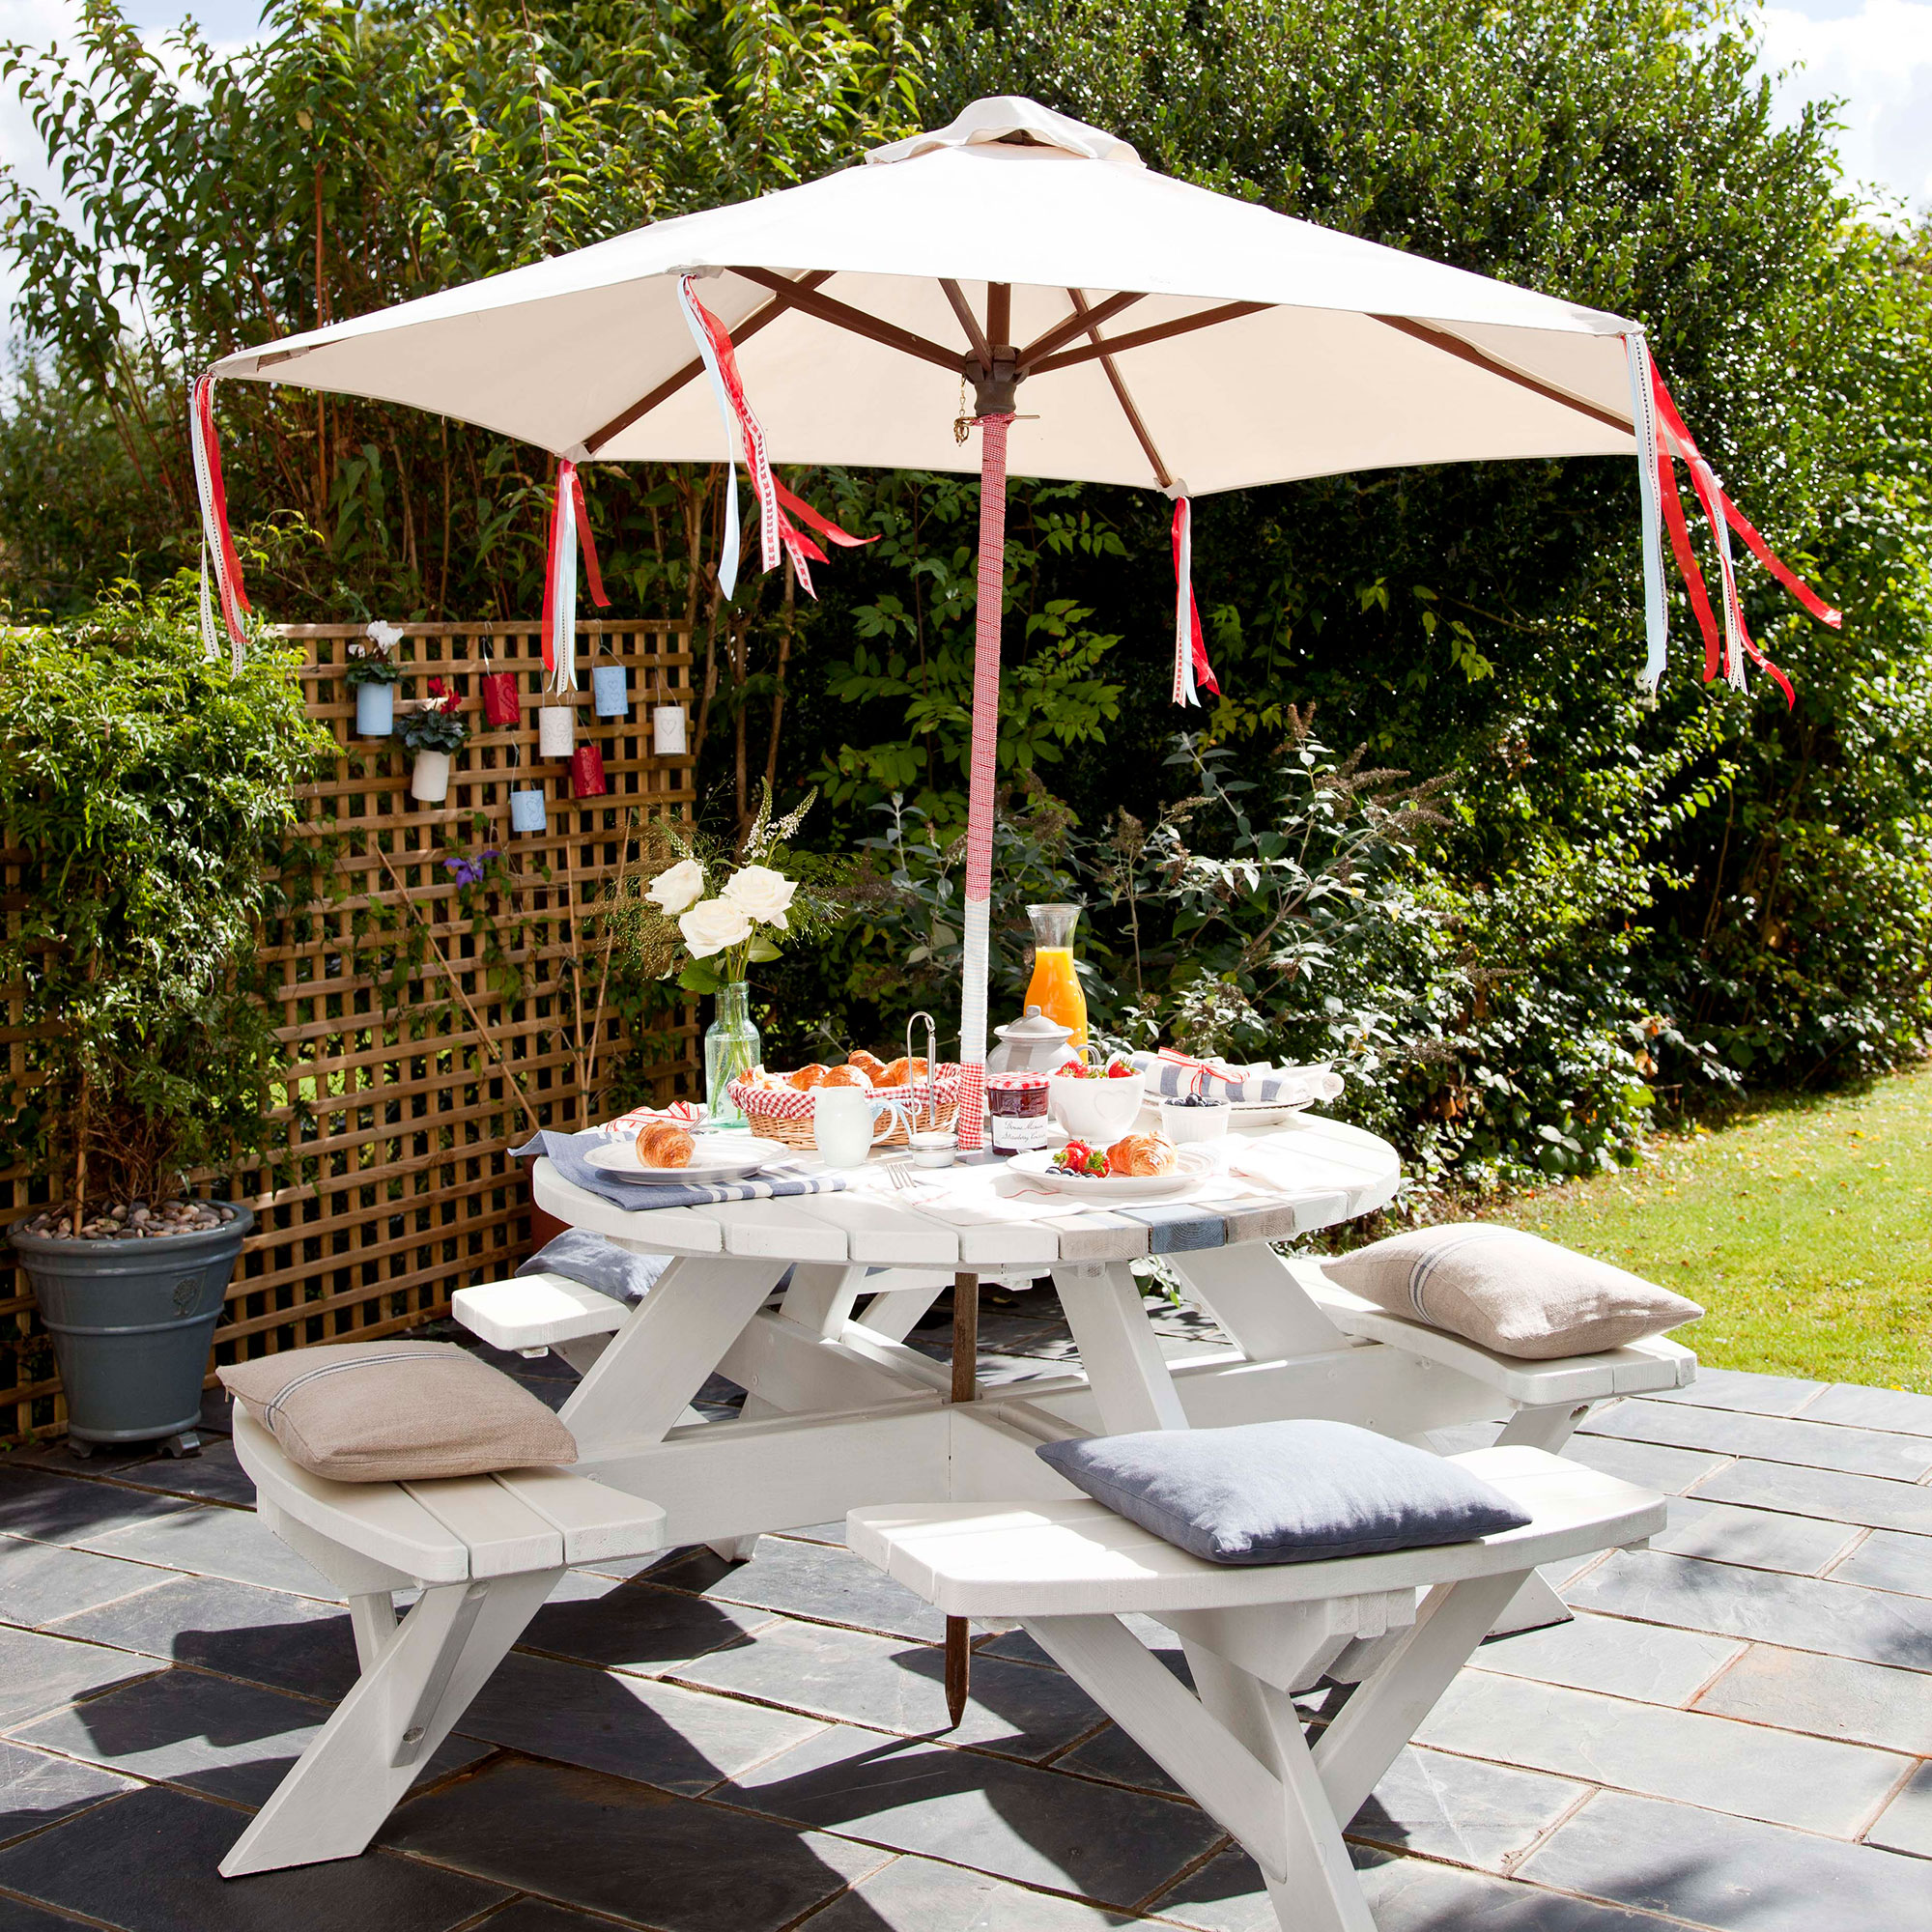 Round white garden table with parasol in midddle